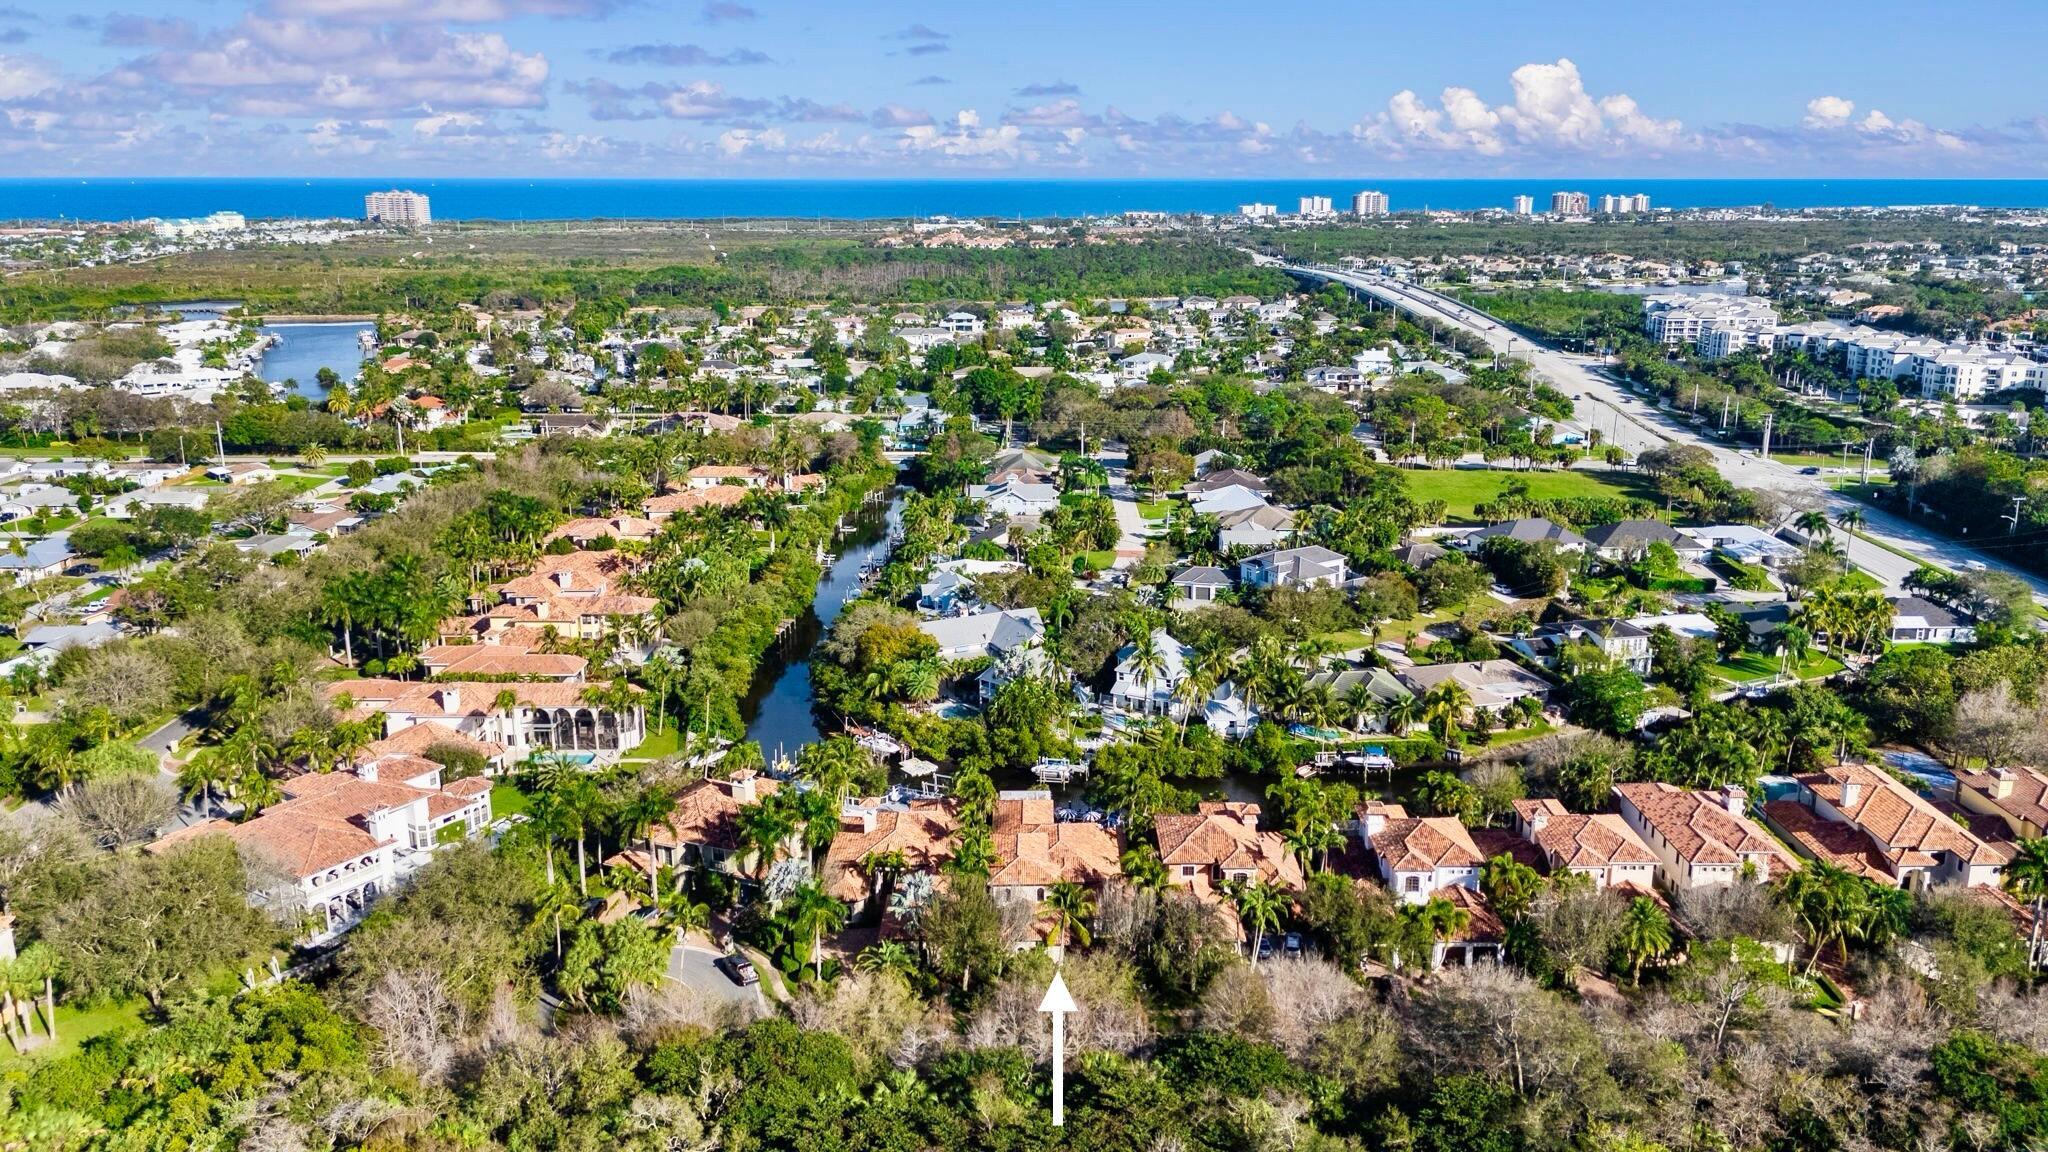 This updated waterfront home is located in The Cove, a waterfront community within a gated enclave just minutes from the Beach. It is situated next to the Bears club and across from Frenchmans Creek, offering a tranquil lifestyle along a picturesque navigable canal, adjacent to the main Intrascoastal.&#8232;&#8232;The home boasts nearly 4,000 square feet of living space, featuring a first-floor primary bedroom and a guest bedroom. With a total of four bedrooms, a den, and 4.5 baths, as well as a 2-car garage, there is plenty of space. Inside and out, the property showcases stunning upgrades, including marble and wood flooring in the main living areas. All windows and doors are high impact resistant for peace of mind.&#8232;&#8232;The custom kitchen is a true masterpiece, equipped with a sp impact resistant for your peace of mind.

The custom kitchen is a true masterpiece with a spacious center island, quartz countertops, a 6-burner gas cooktop, and a 48" refrigerator. Outdoor living is equally impressive, with a summer kitchen featuring a stainless steel barbecue, perfect for entertaining. The primary bedroom offers an updated bathroom and three walk-in closets. The property also offers a beautiful custom heated pool, spa, two covered lanais, and expansive patios for relaxation.

Water enthusiasts will appreciate the private dock, which includes a 6,000 lb electronic boat lift and a floating platform for easy canal access. Additional features of this exceptional property include Phantom screens for insect-free outdoor enjoyment, whole-home reverse osmosis for purified water, an electric fireplace in the owner's suite, and the living room. Furthermore, the house is equipped with a whole house generator. Three brand new HVAC systems have been installed